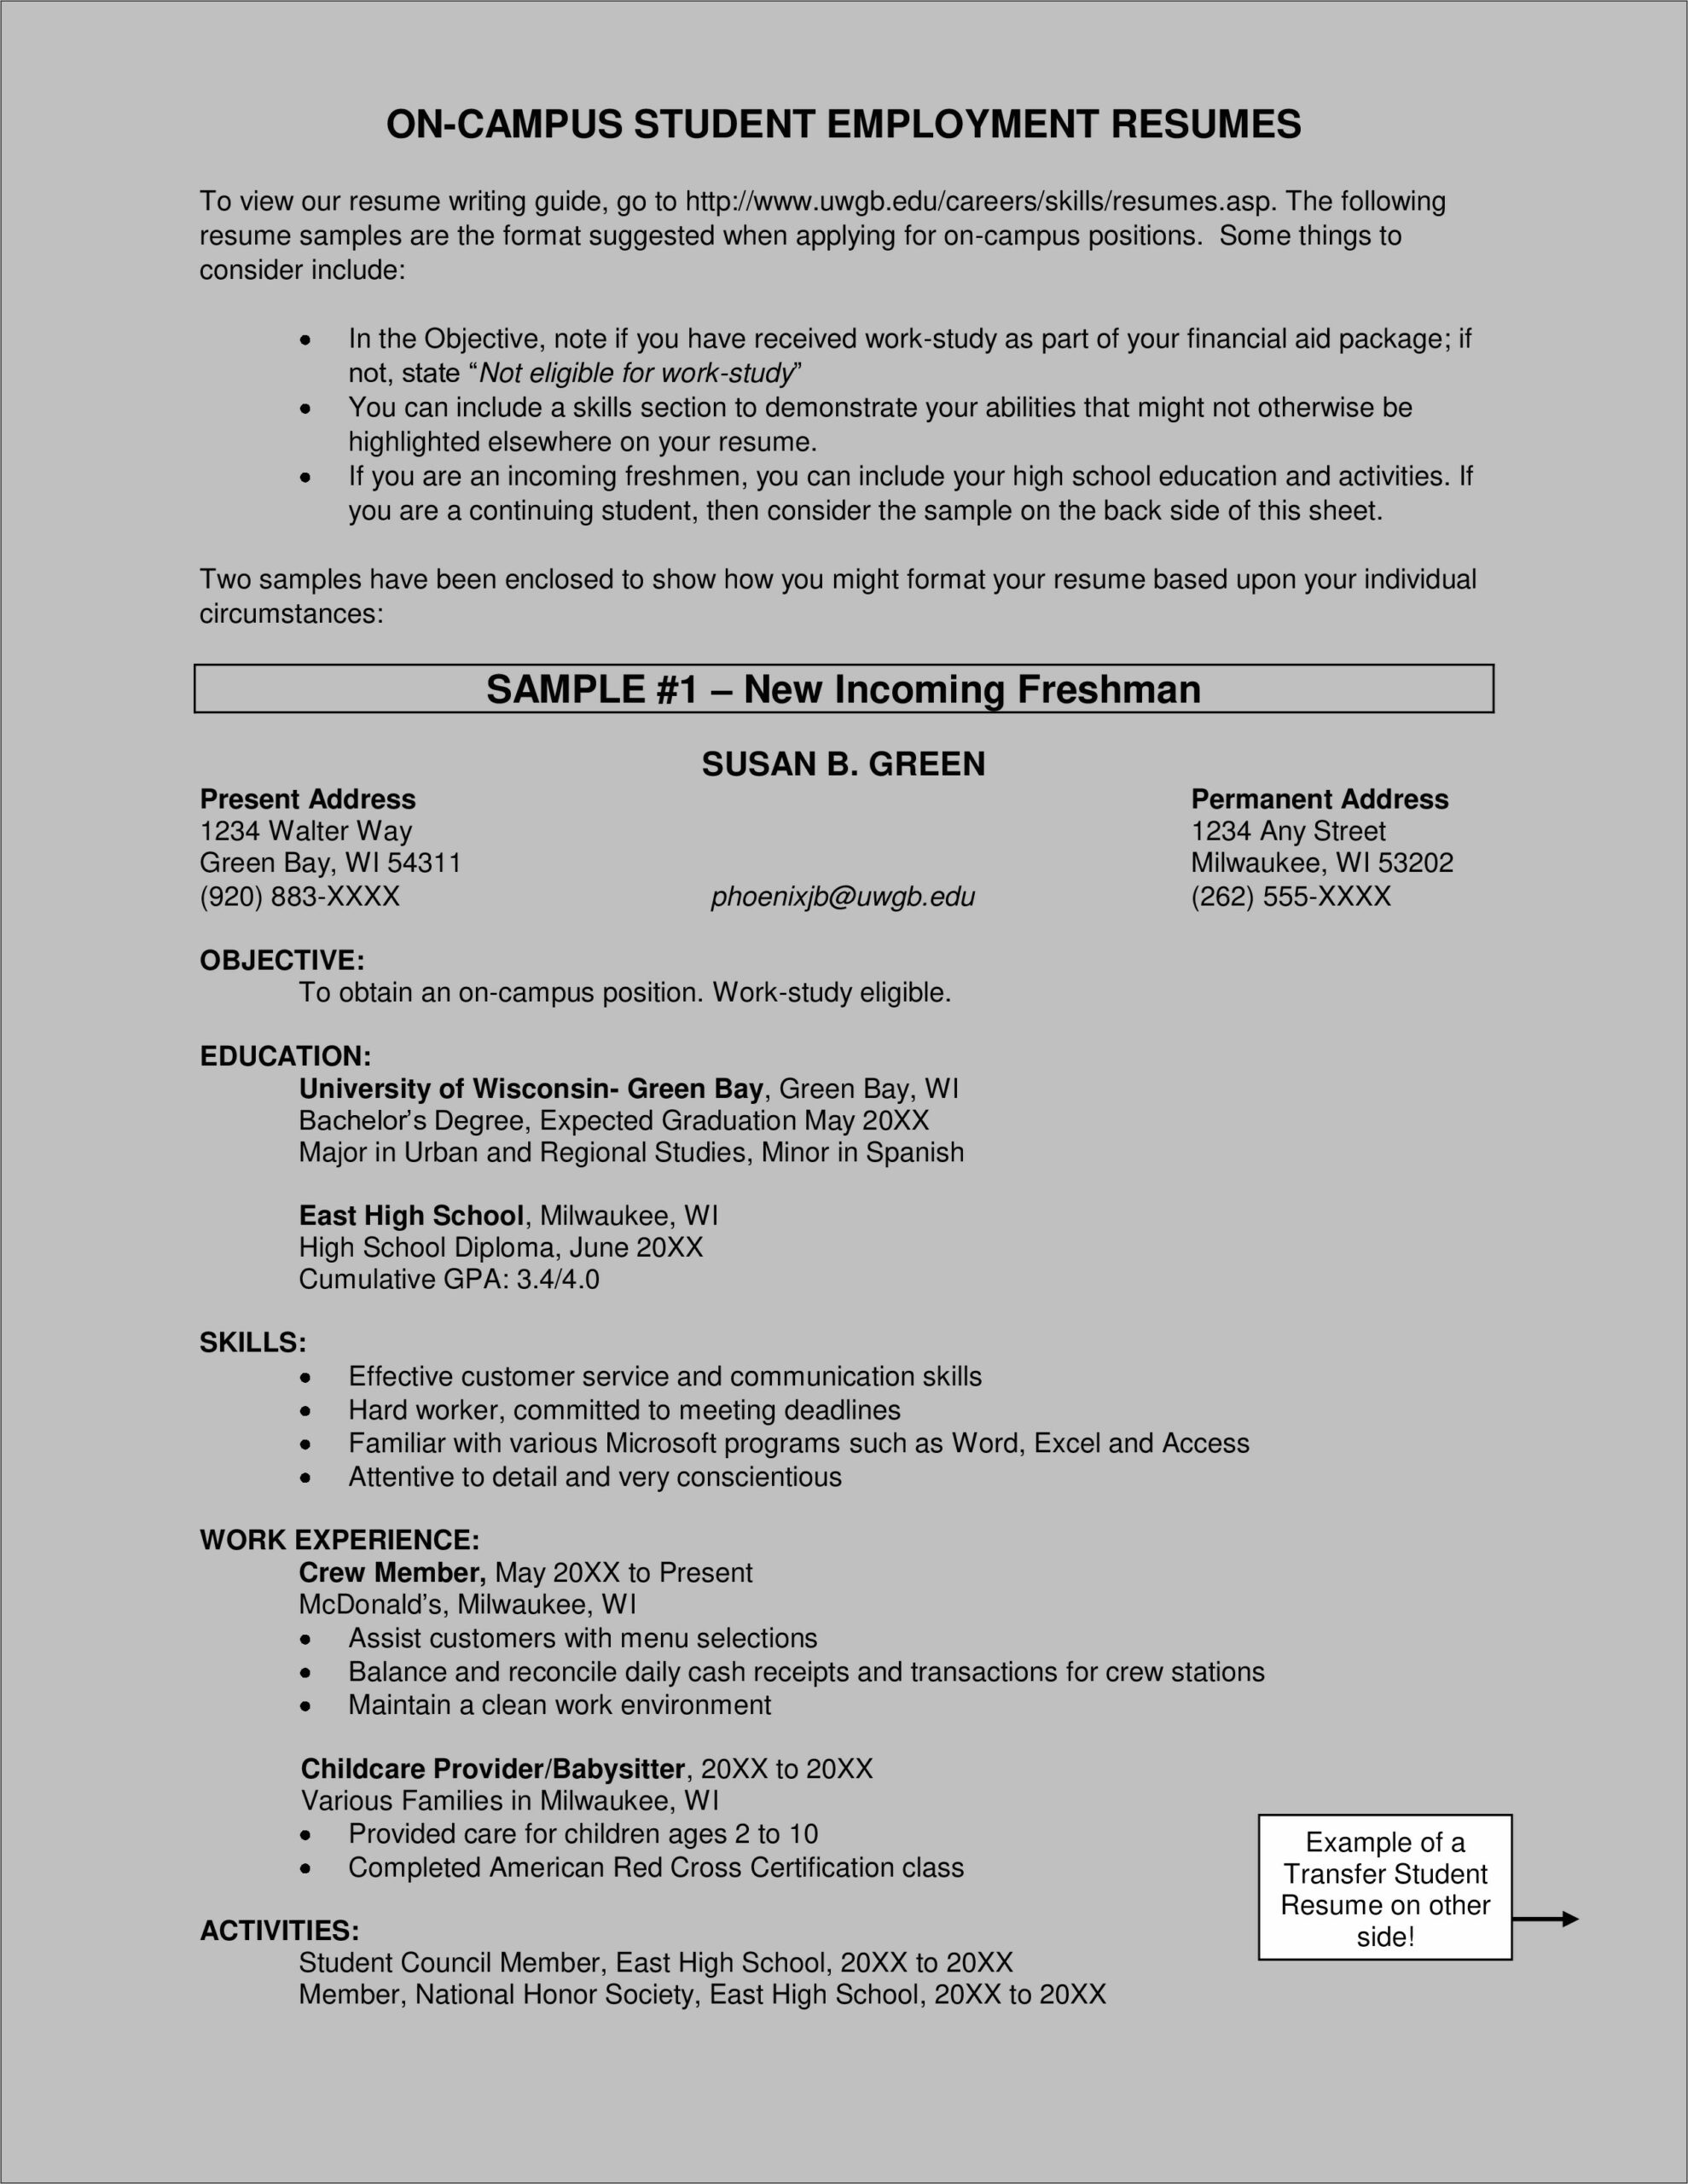 Resume Objective For Work Study